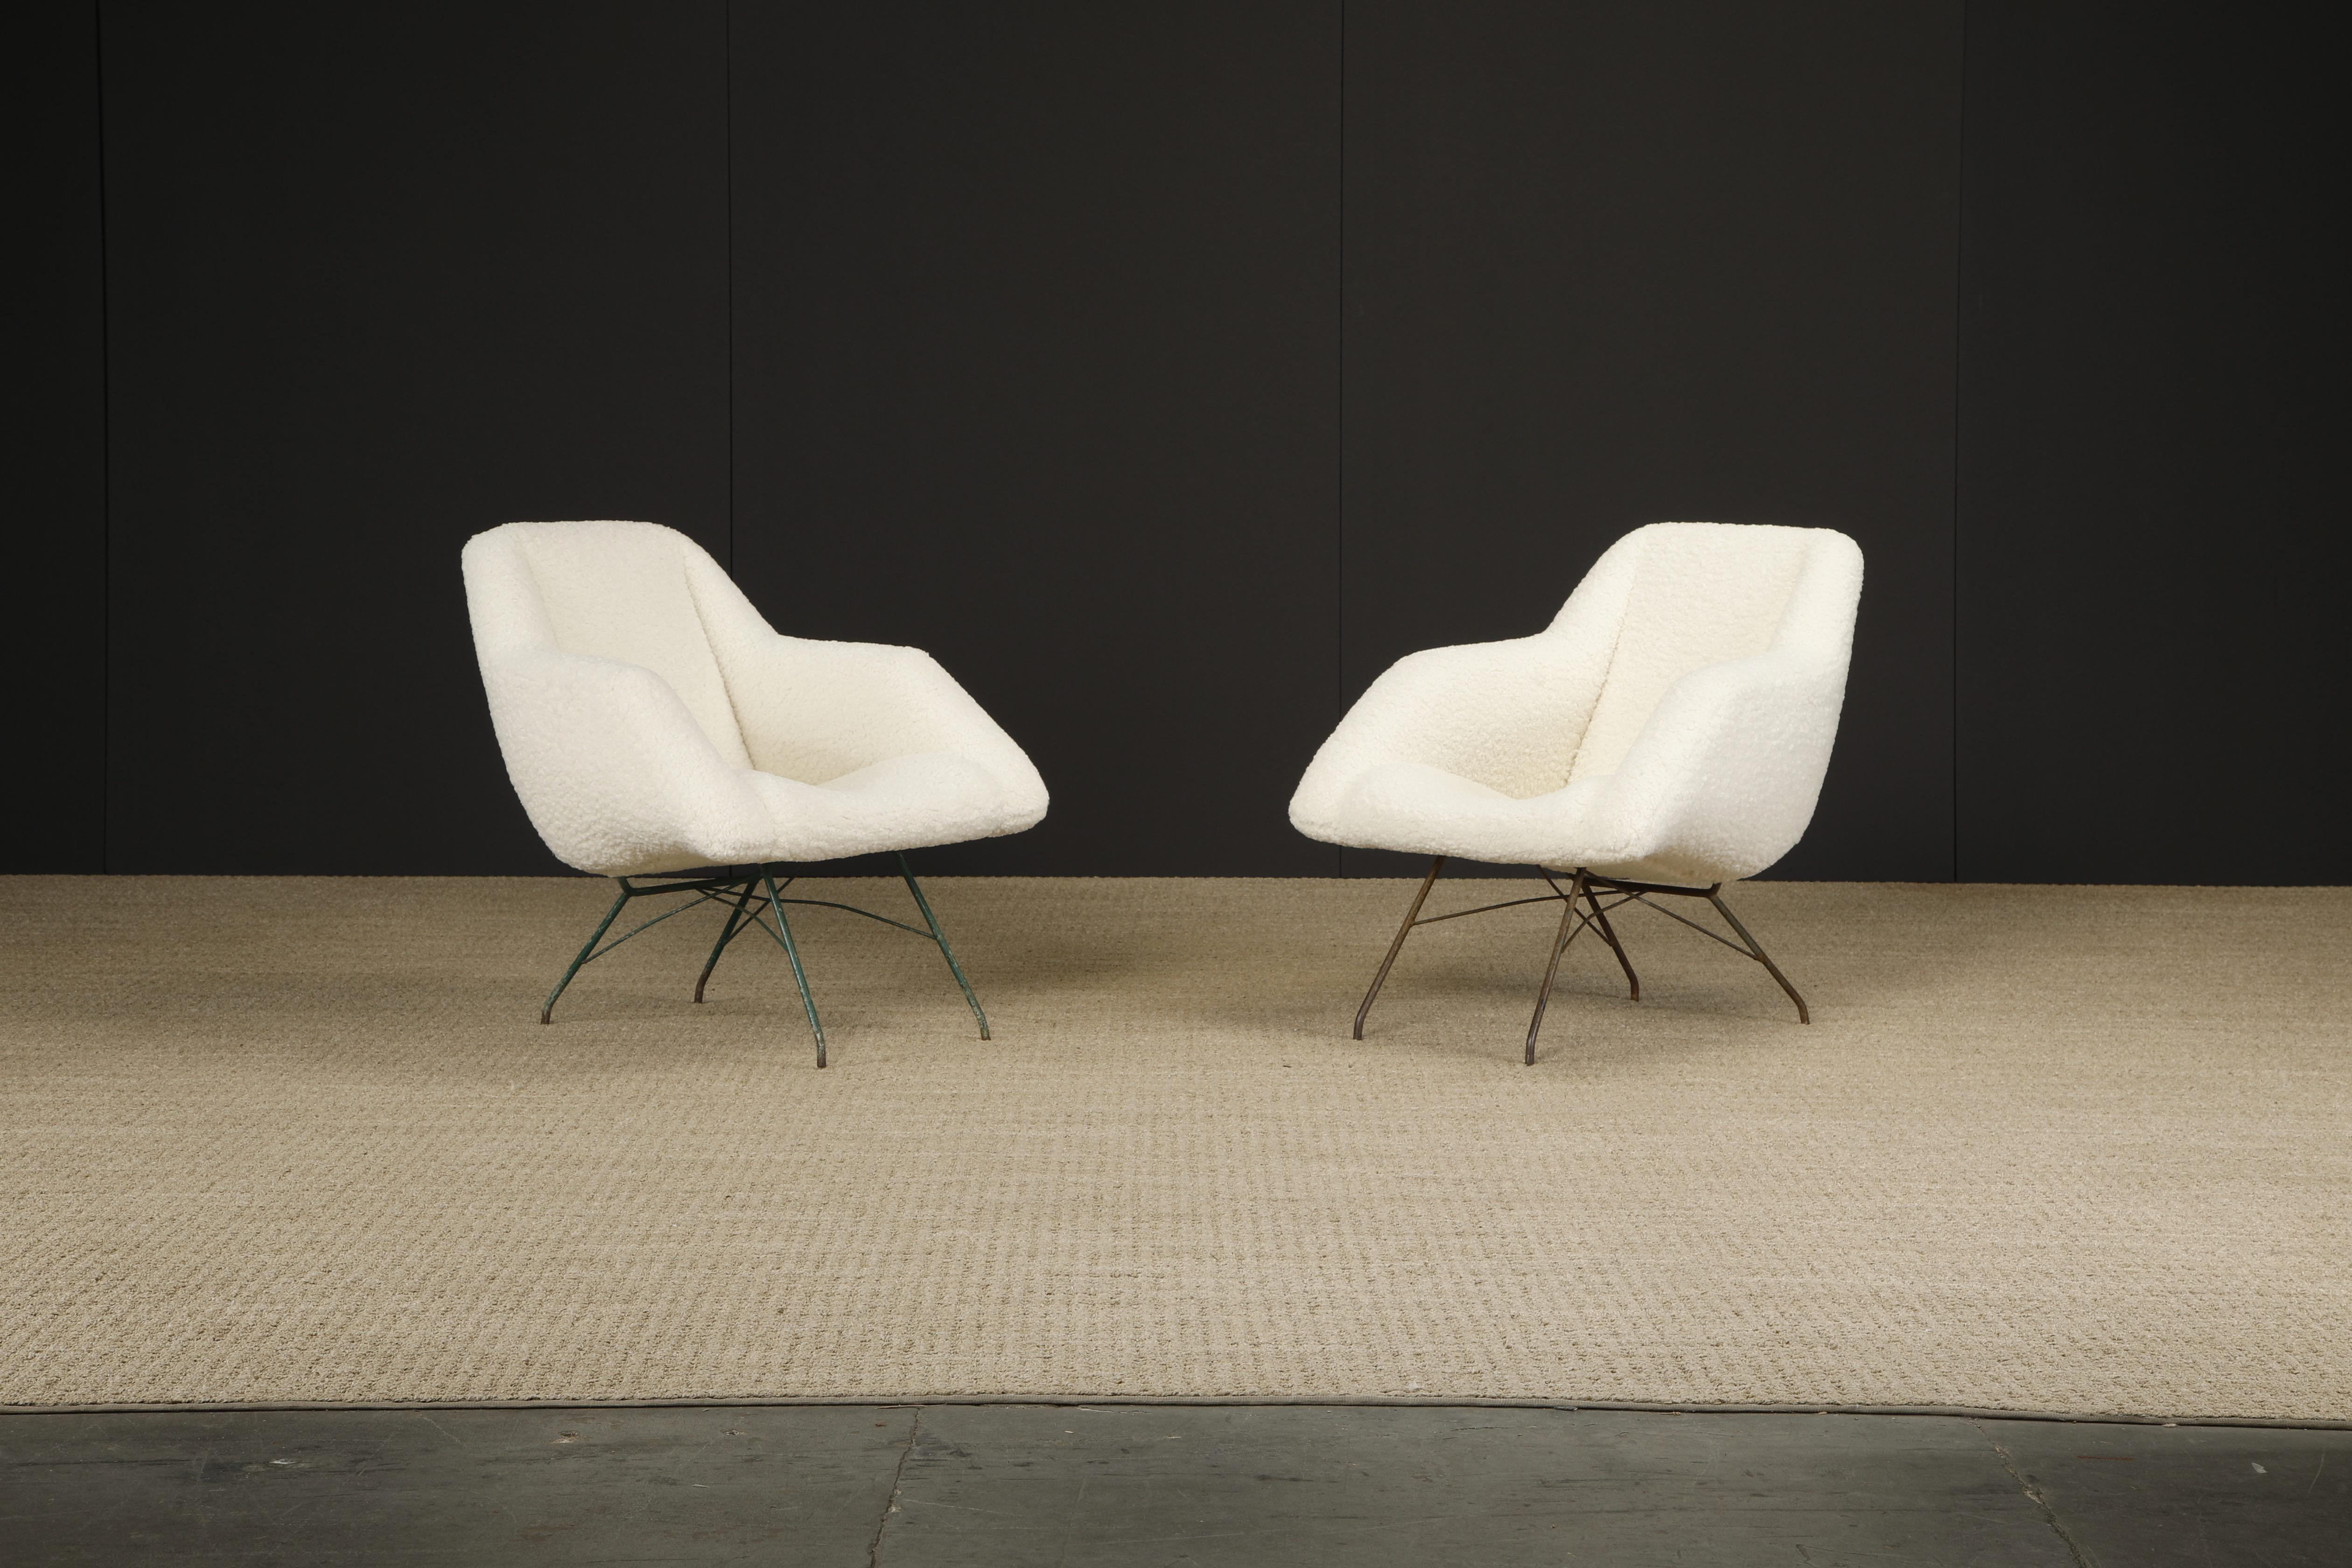 Beautifully reupholstered with soft nubby white bouclé, this pair of 'Concha' chairs by Martin Eisler and Carlo Hauner for Forma, Brazil, encapsulates the quality and innovation of their designs. This elegant scoop chair with its slightly reclined